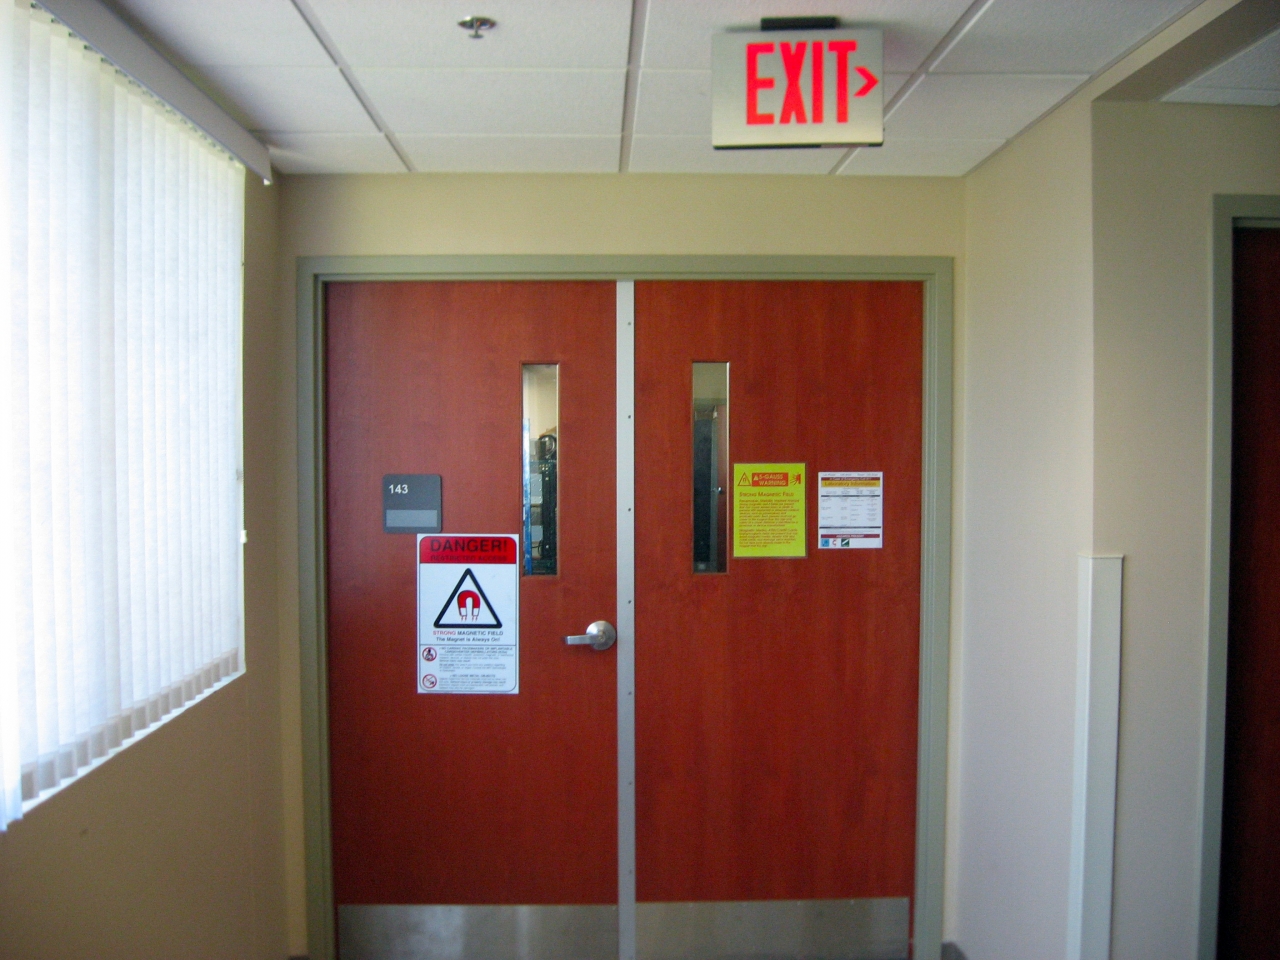 Entrance to lab Shaw 143.